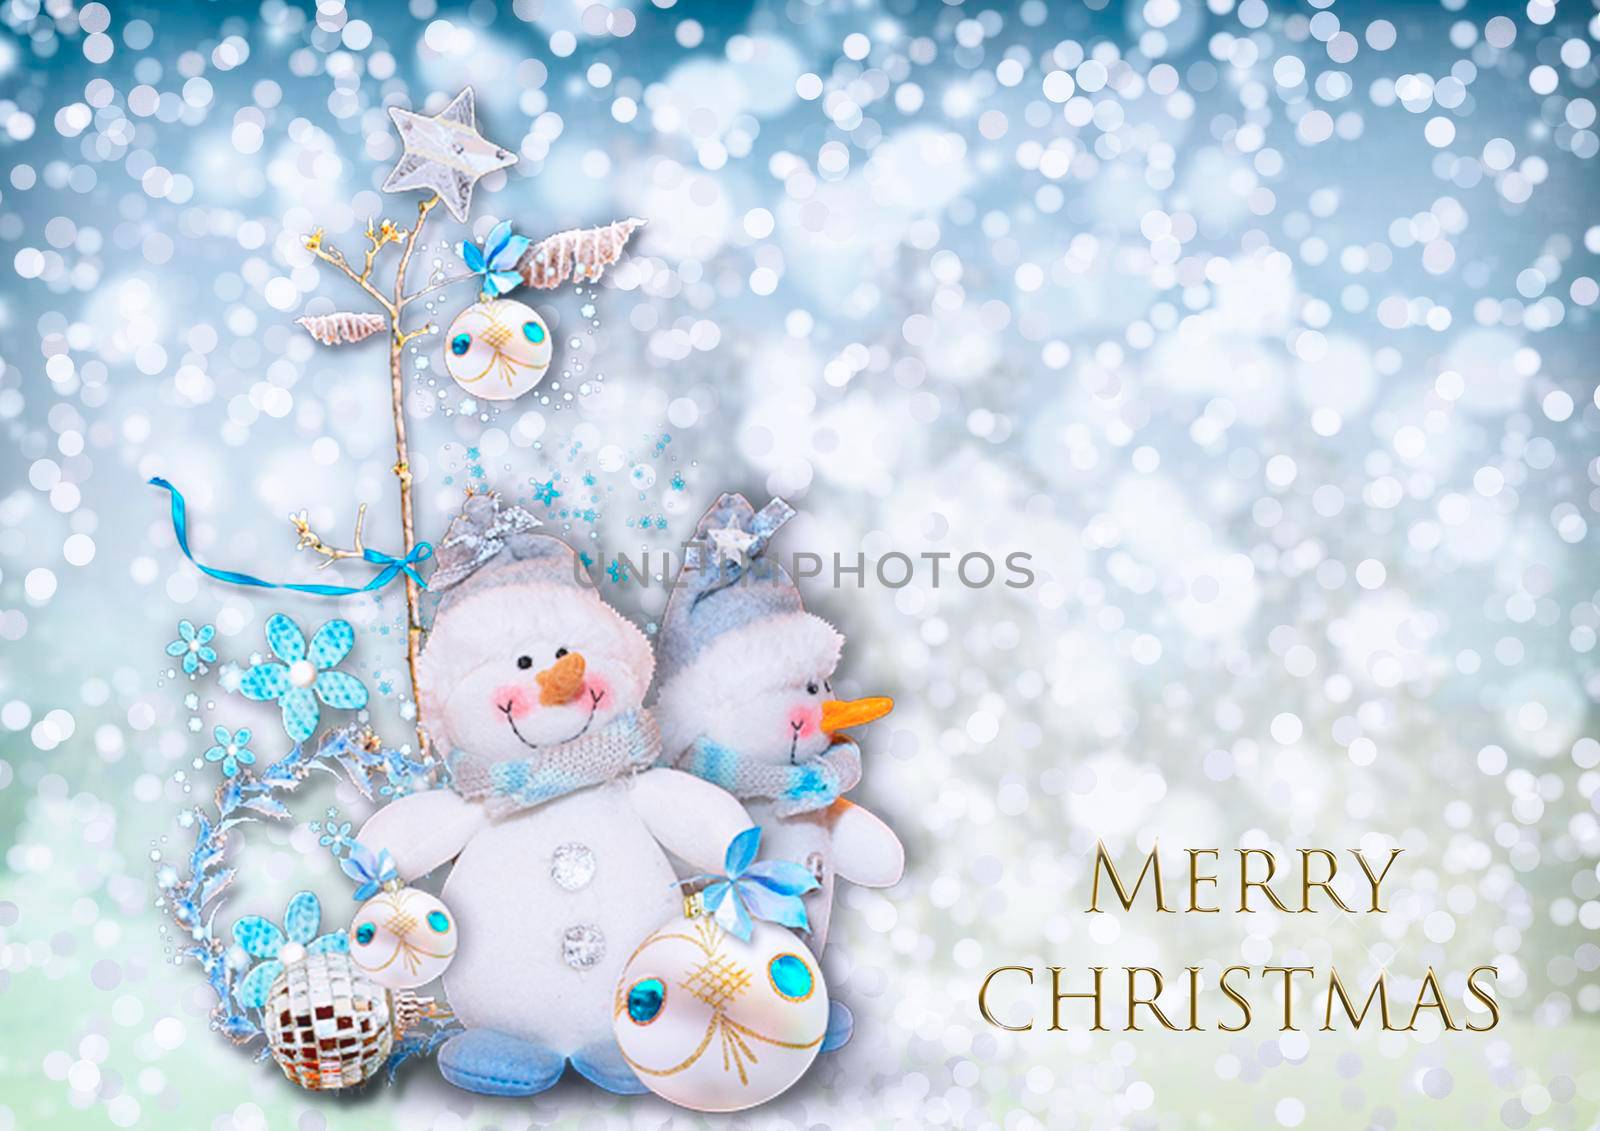 Christmas greeting card with the image of a snowman. by georgina198